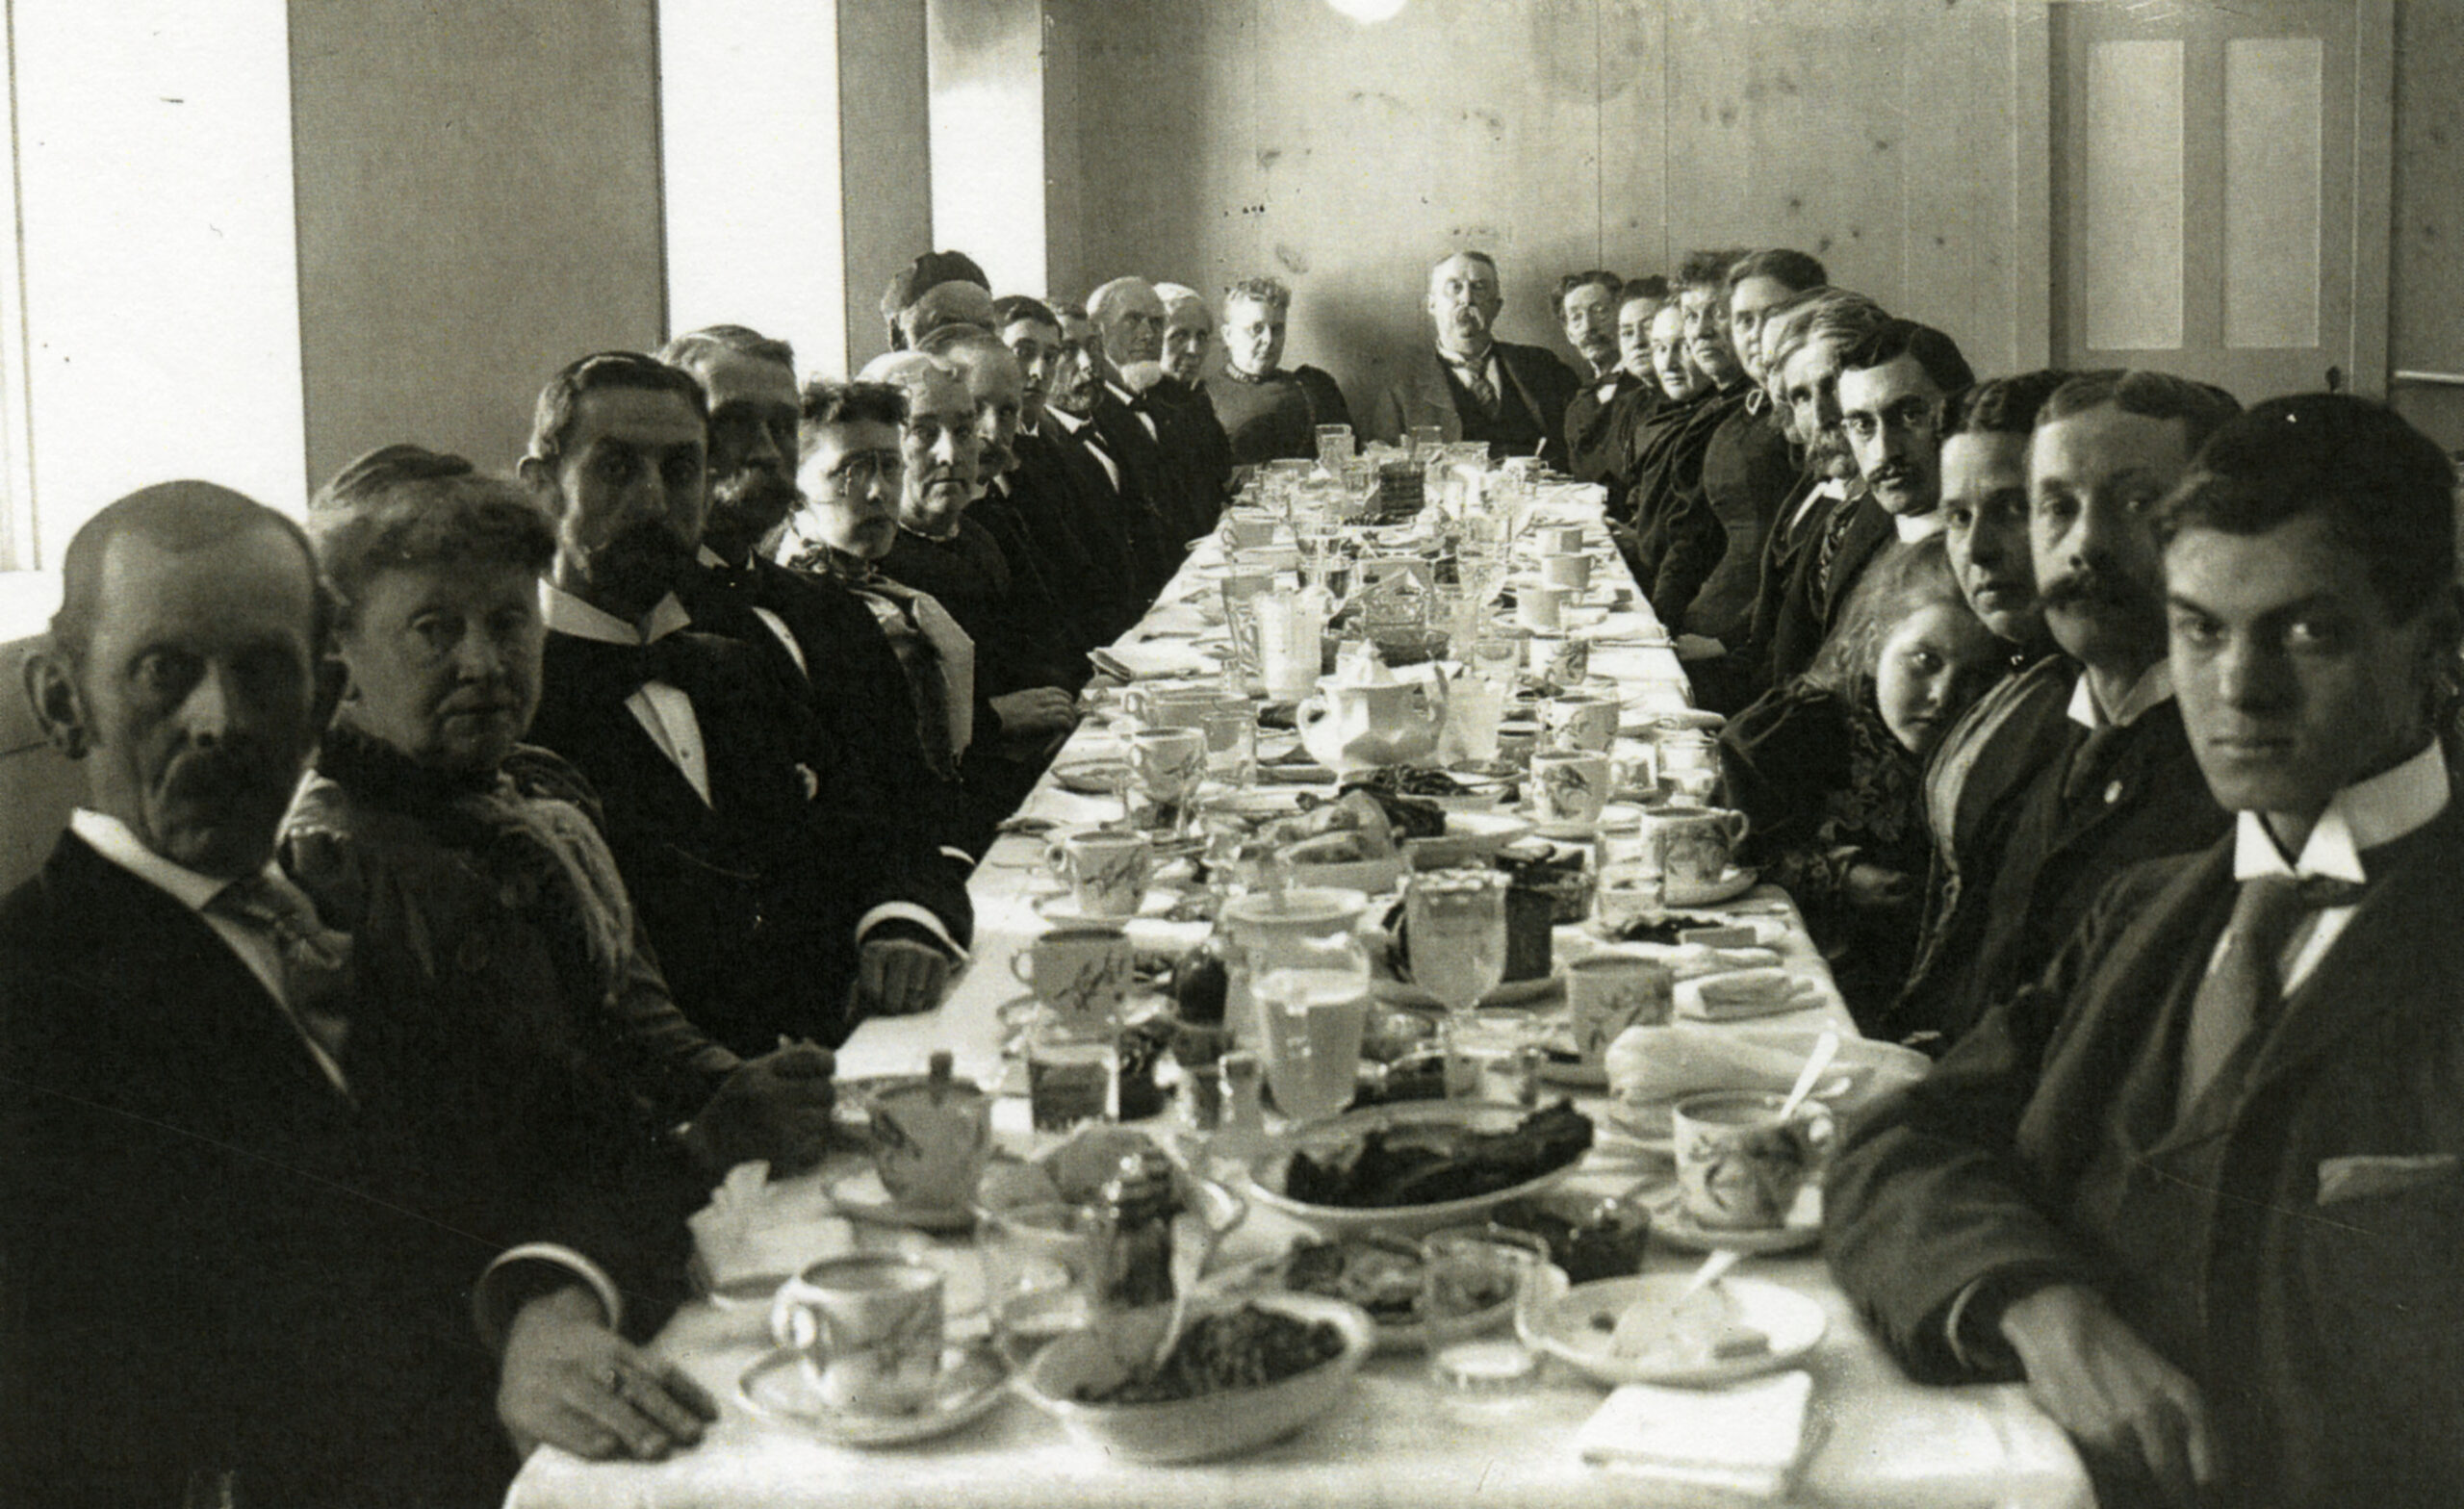 A black and white photo of a large group seated around a table for a birthday party